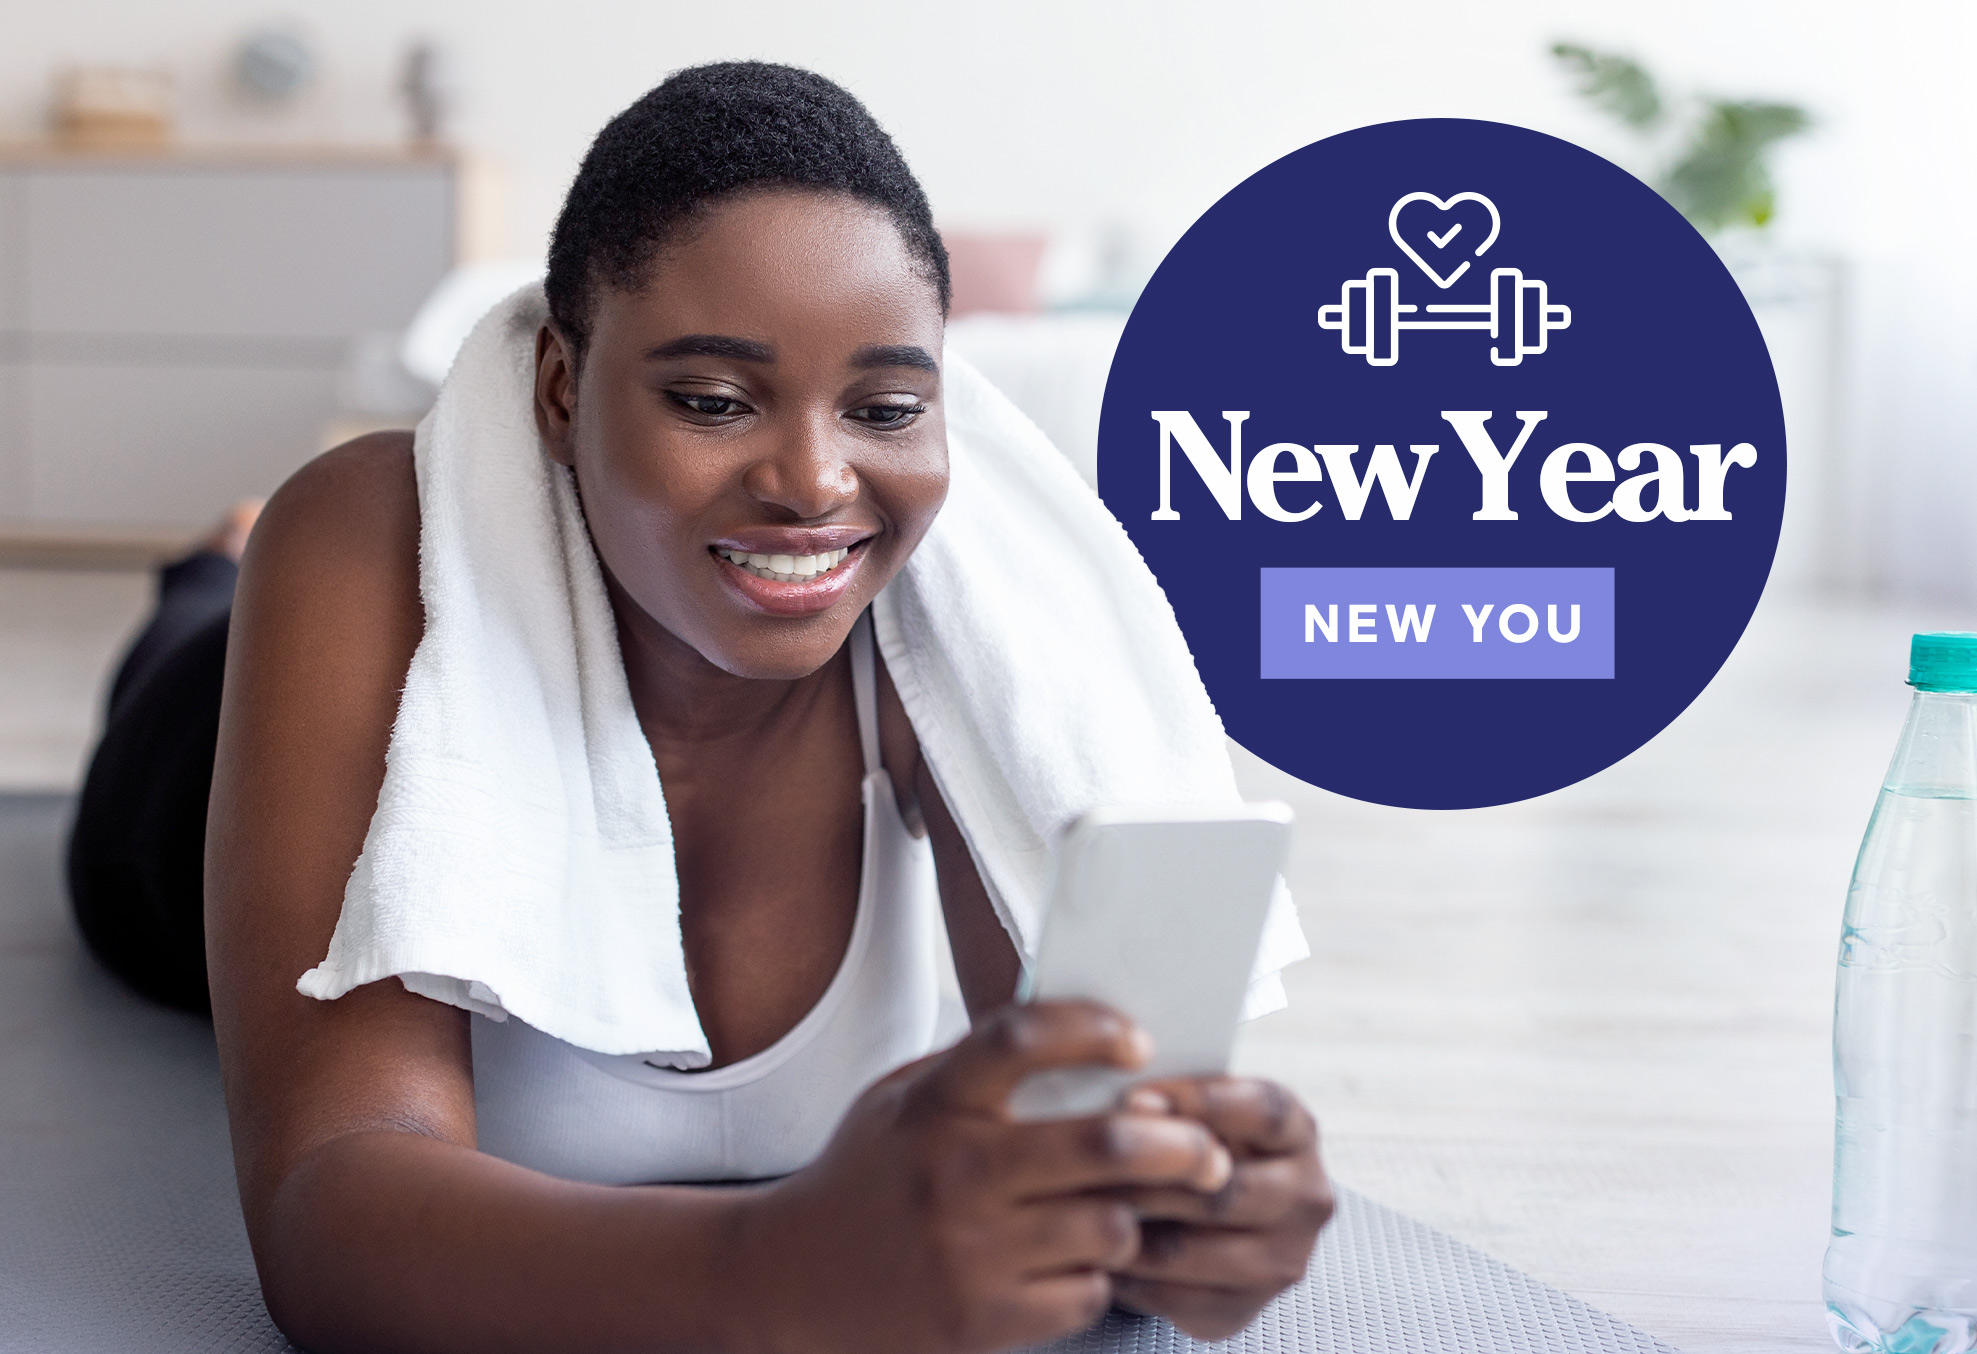 10 Easy Tips for a Healthy Upcoming Year